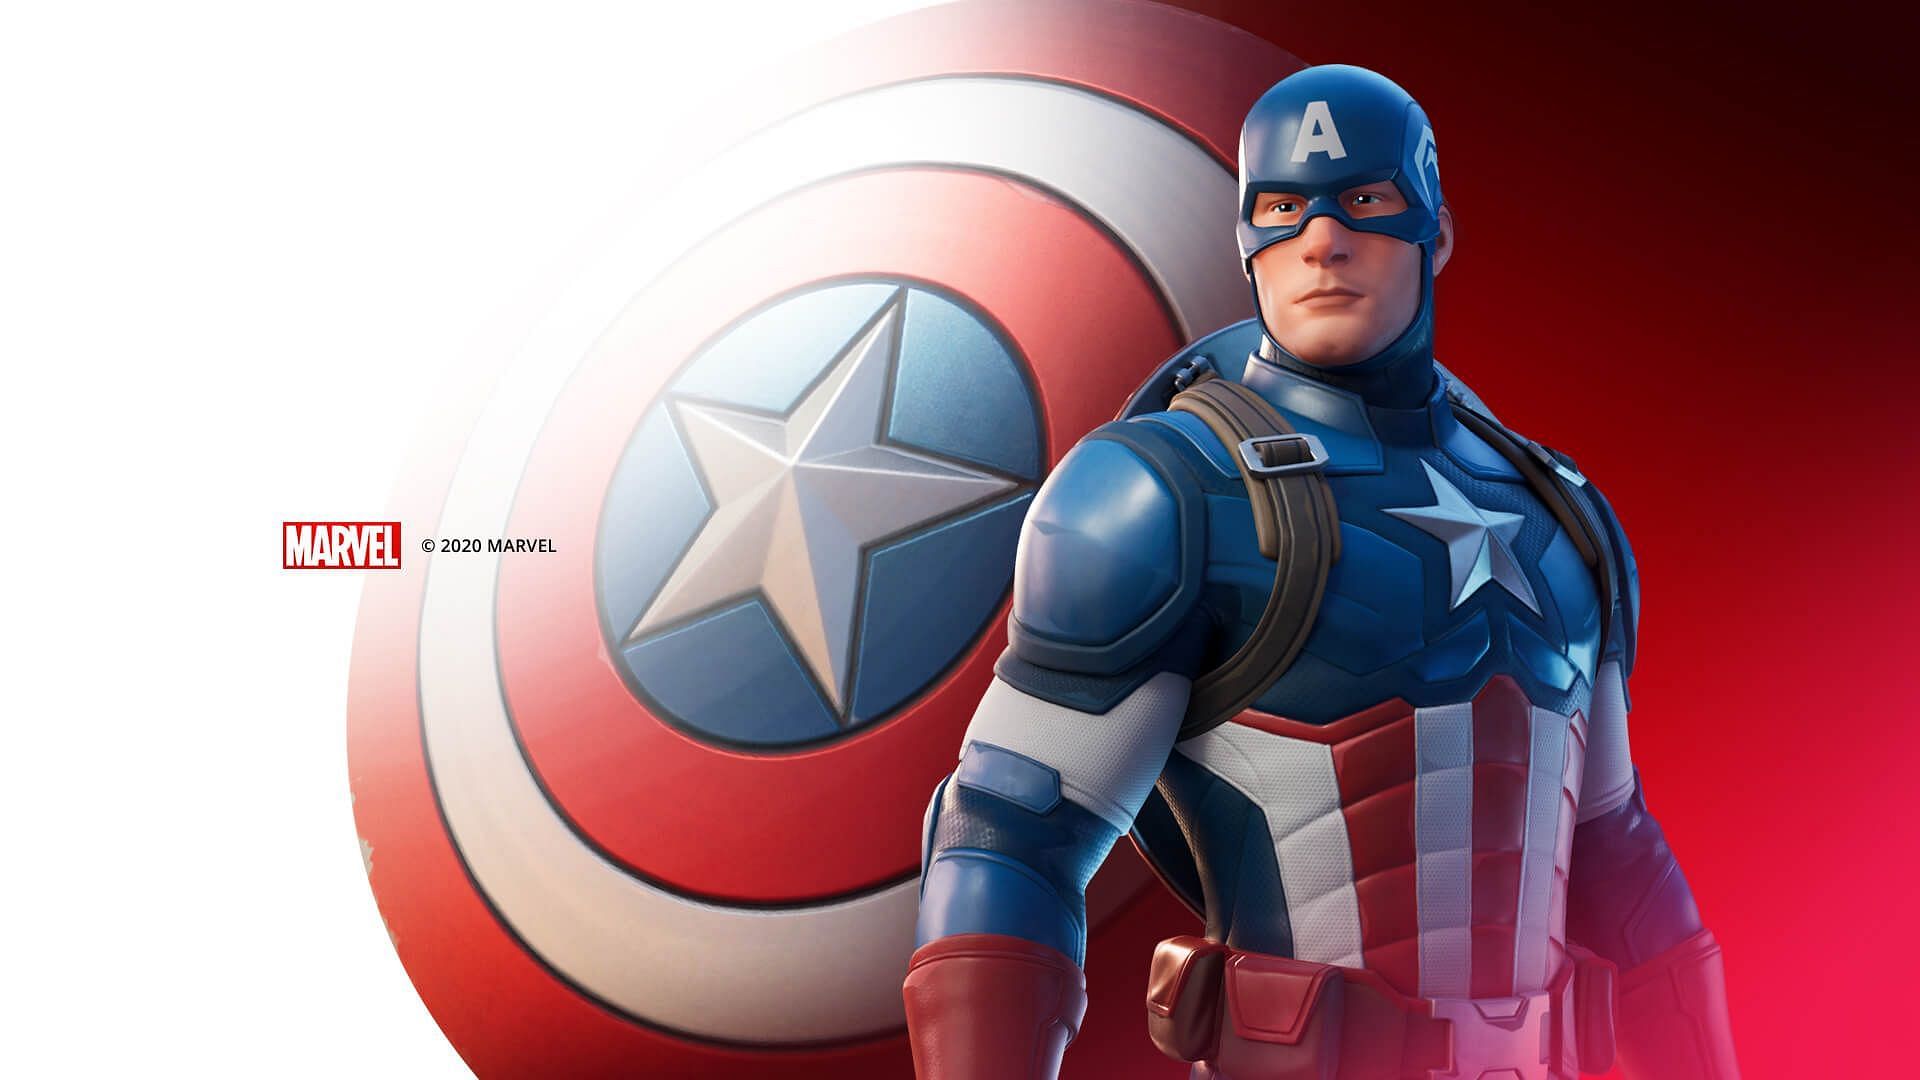 Captain America is a great adaptation in Fortnite (Image via Epic Games)